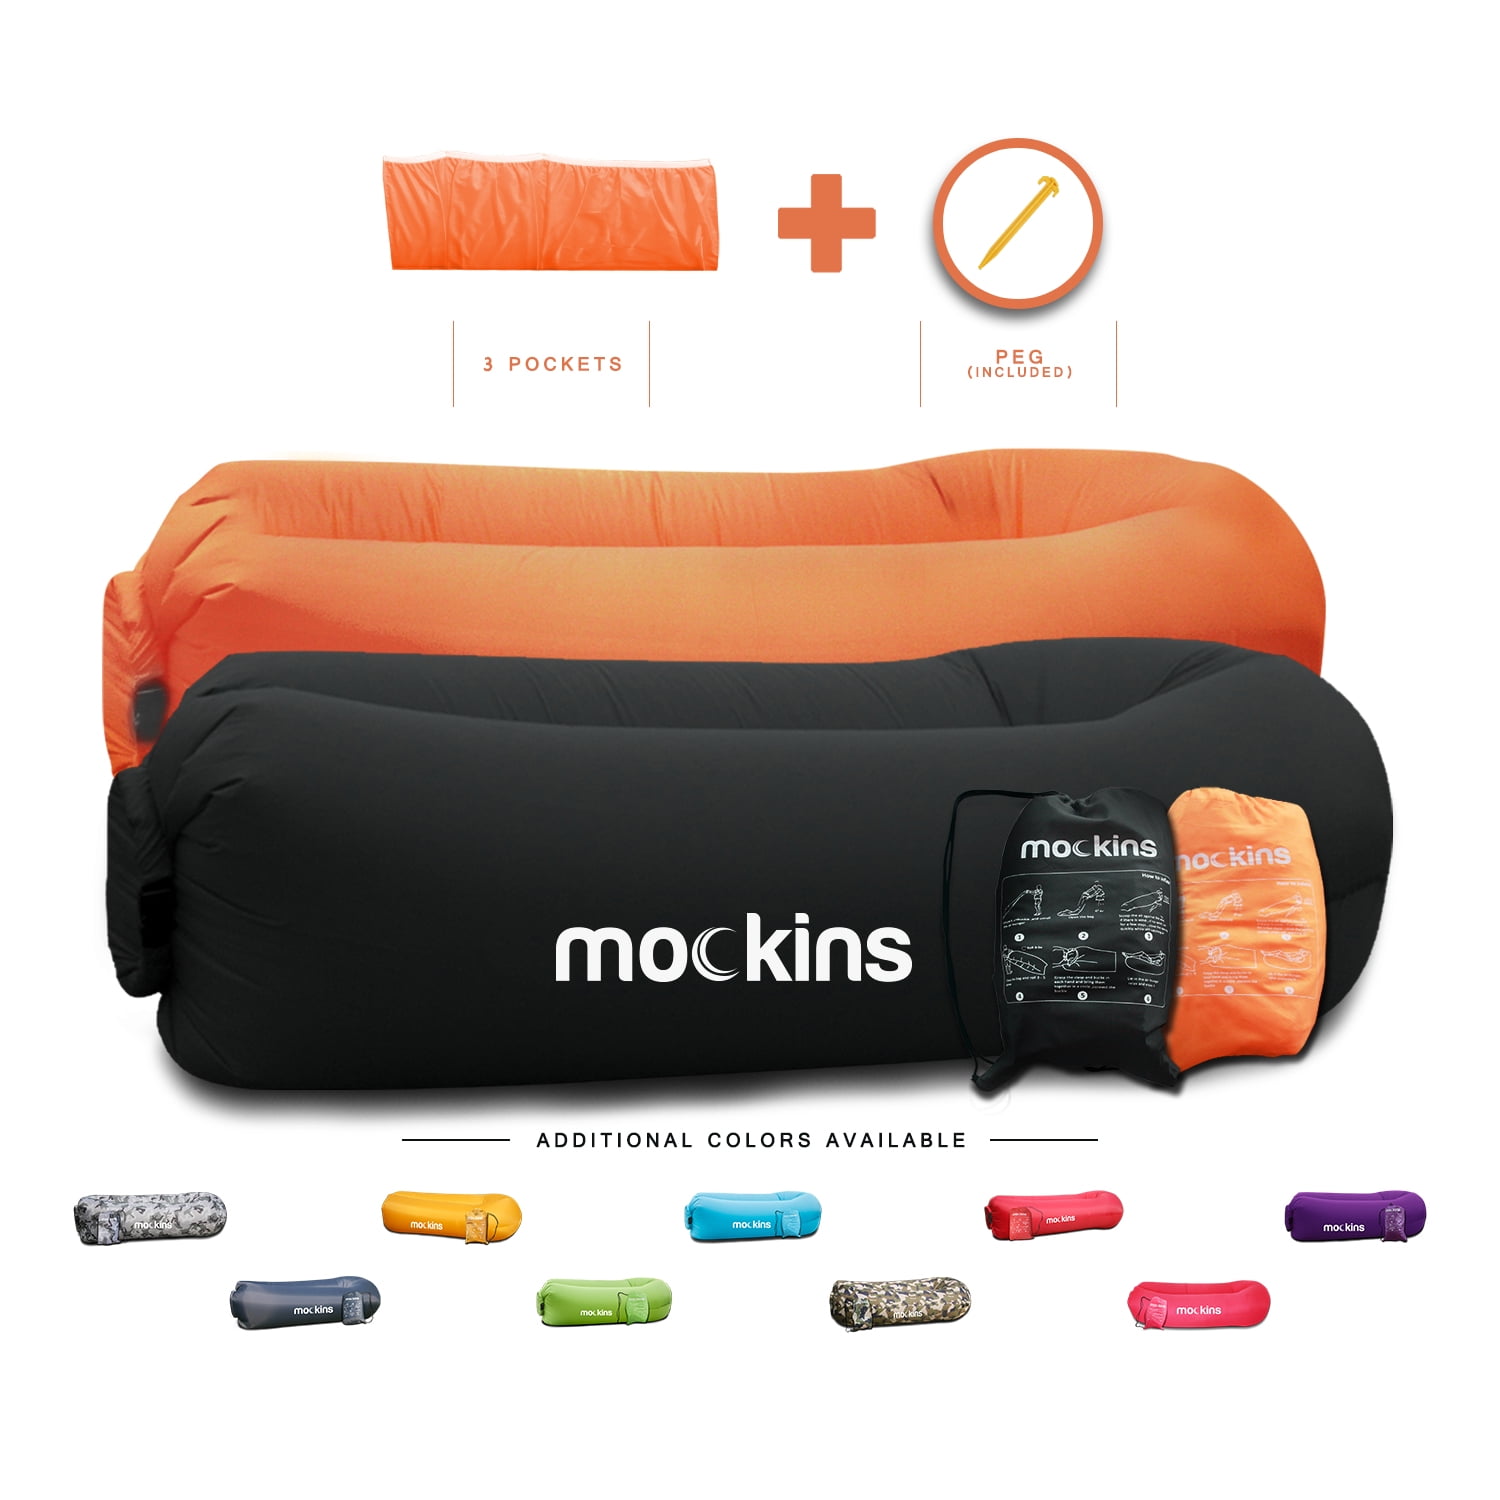 Mockins Black & Orange Inflatable Loungers | Portable Air Sofa with Matching Bags & Pockets | 2-Pack | 210T Polyester